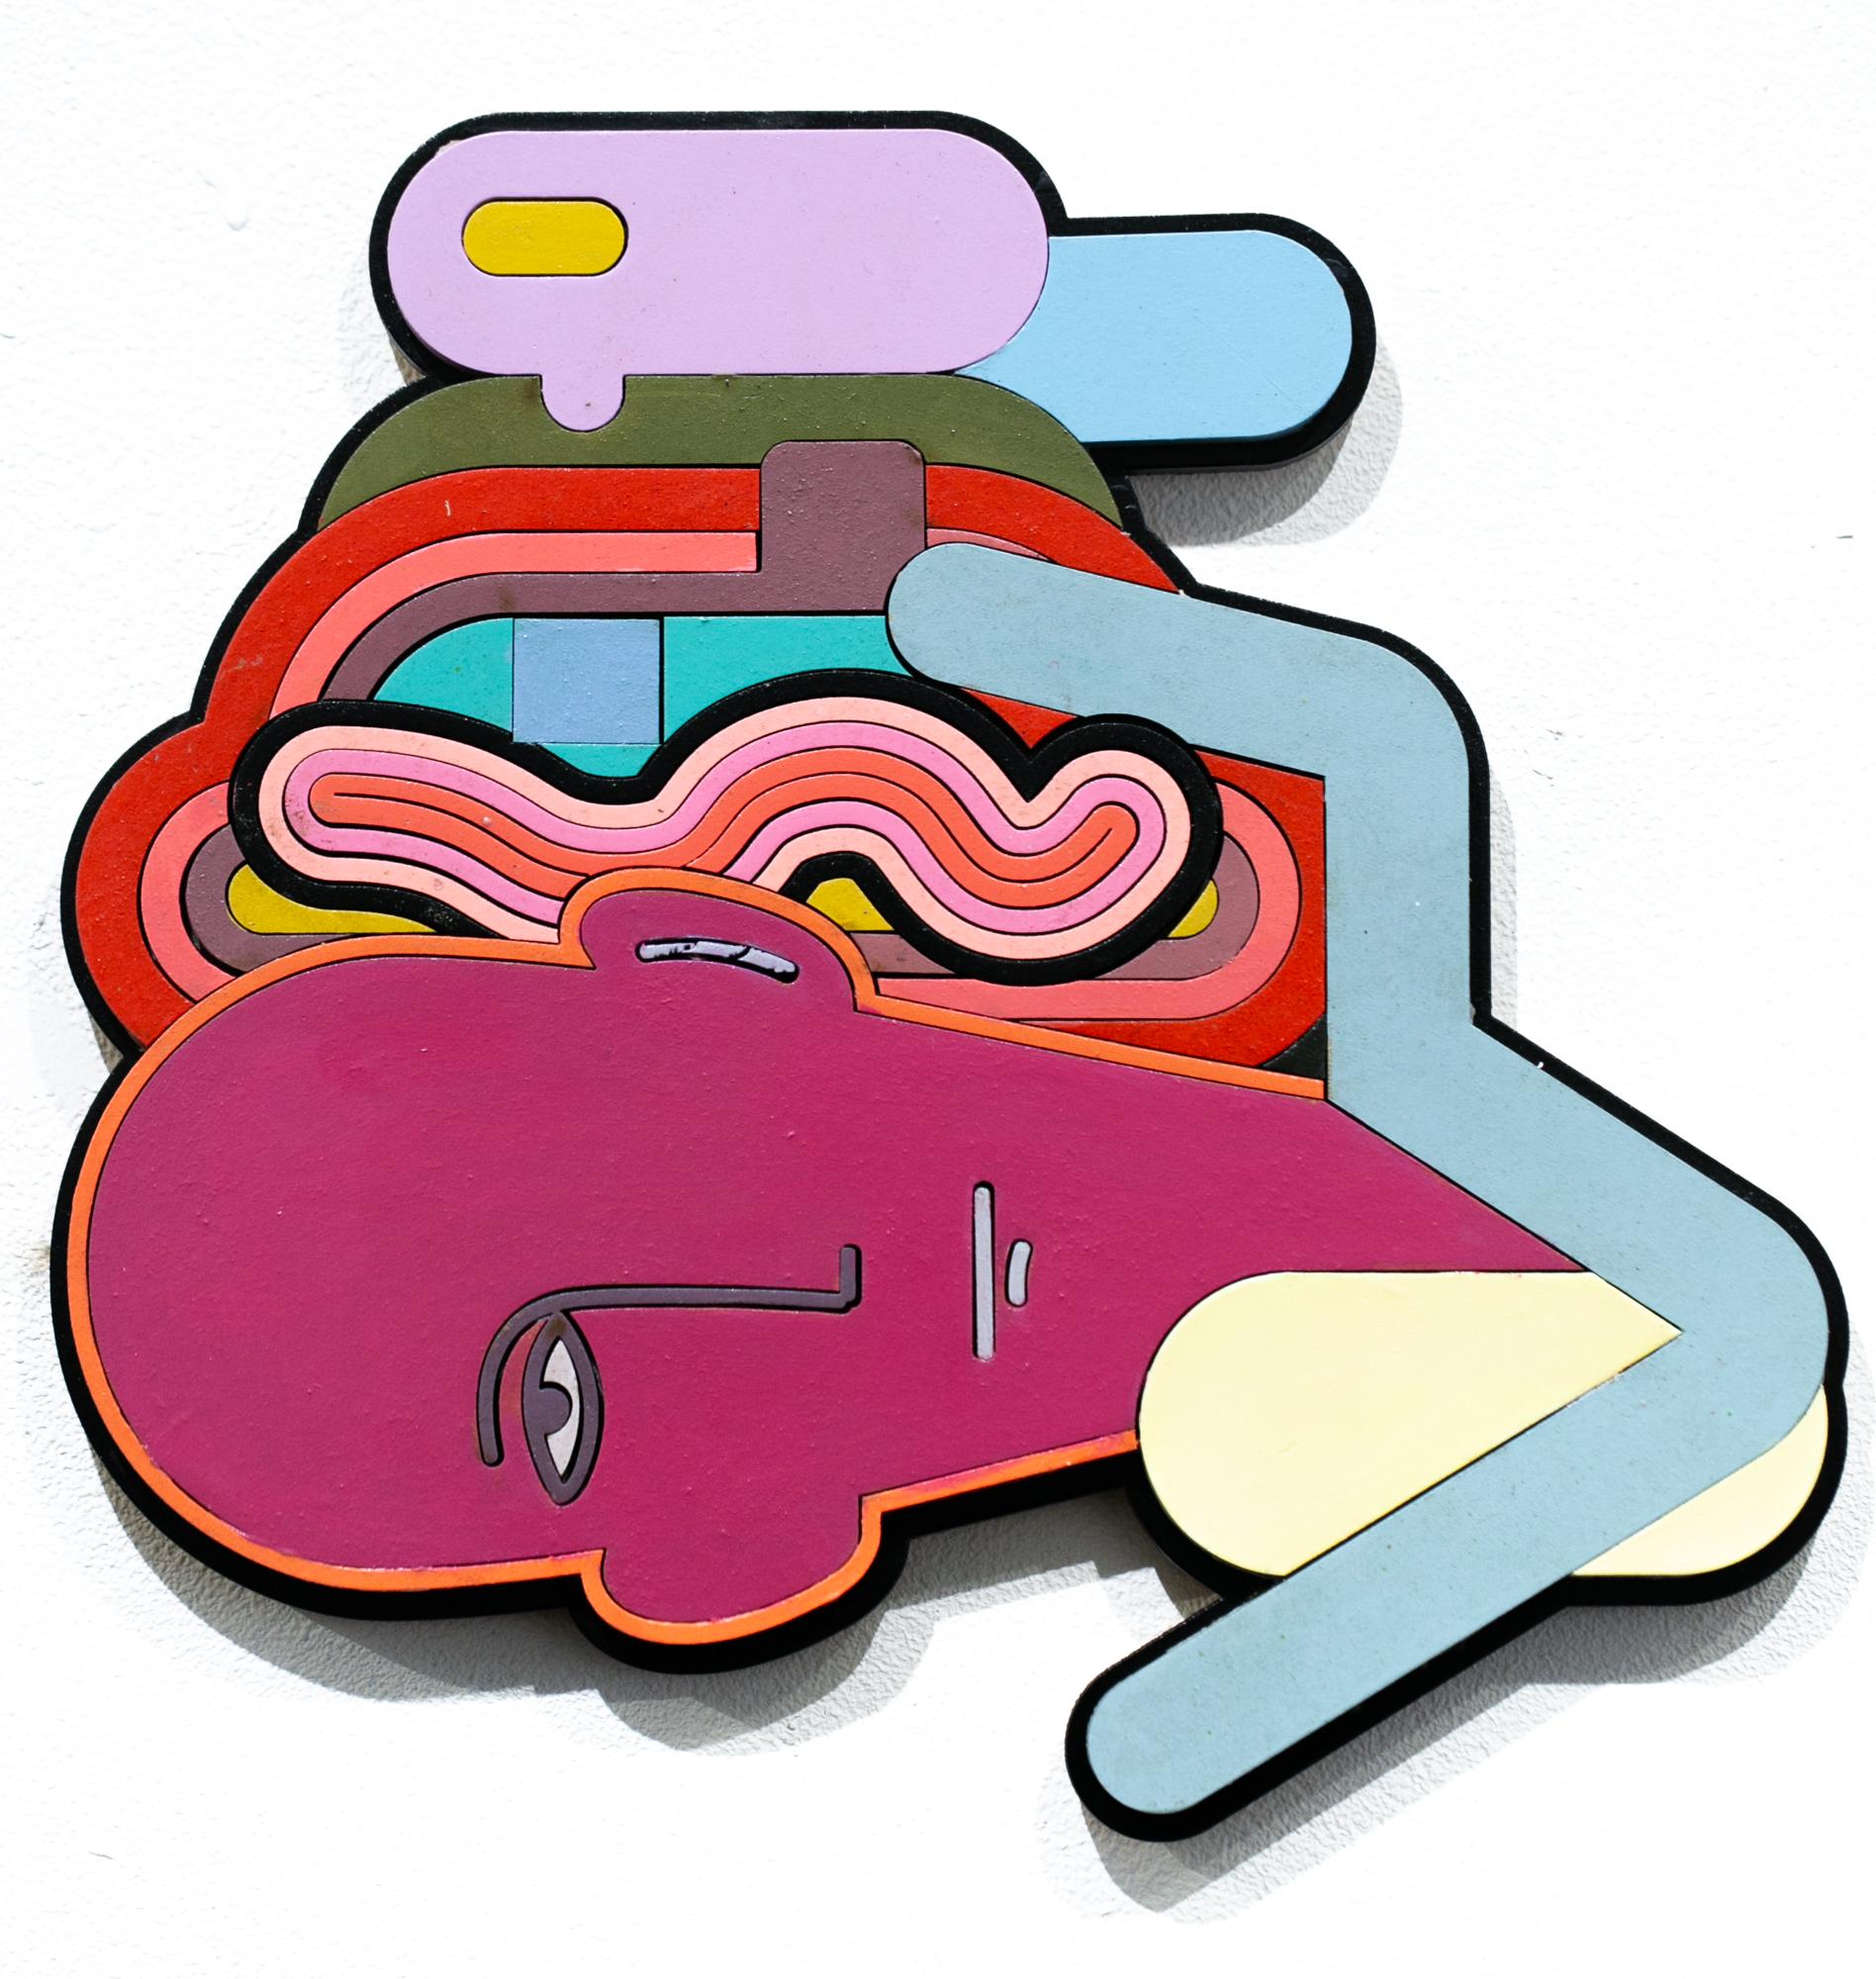 Joey Slaughter Abstract Sculpture - "Pouring one out", Wall-hanging sculpture, Color-Blocking, Abstract, Outline